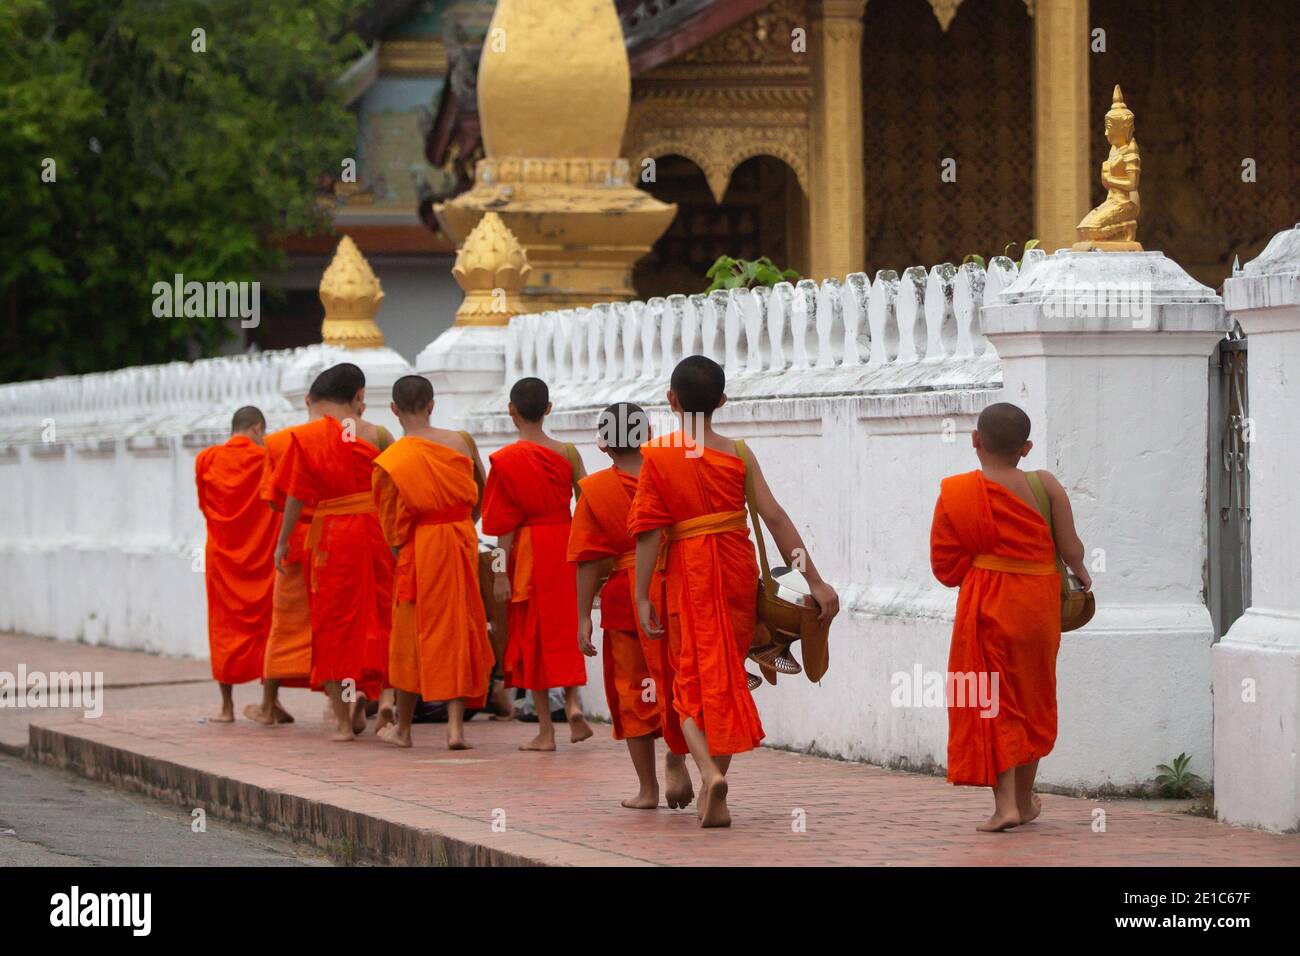 Buddhist monks on everyday morning traditional alms giving in Luang Prabang, Laos. Stock Photo